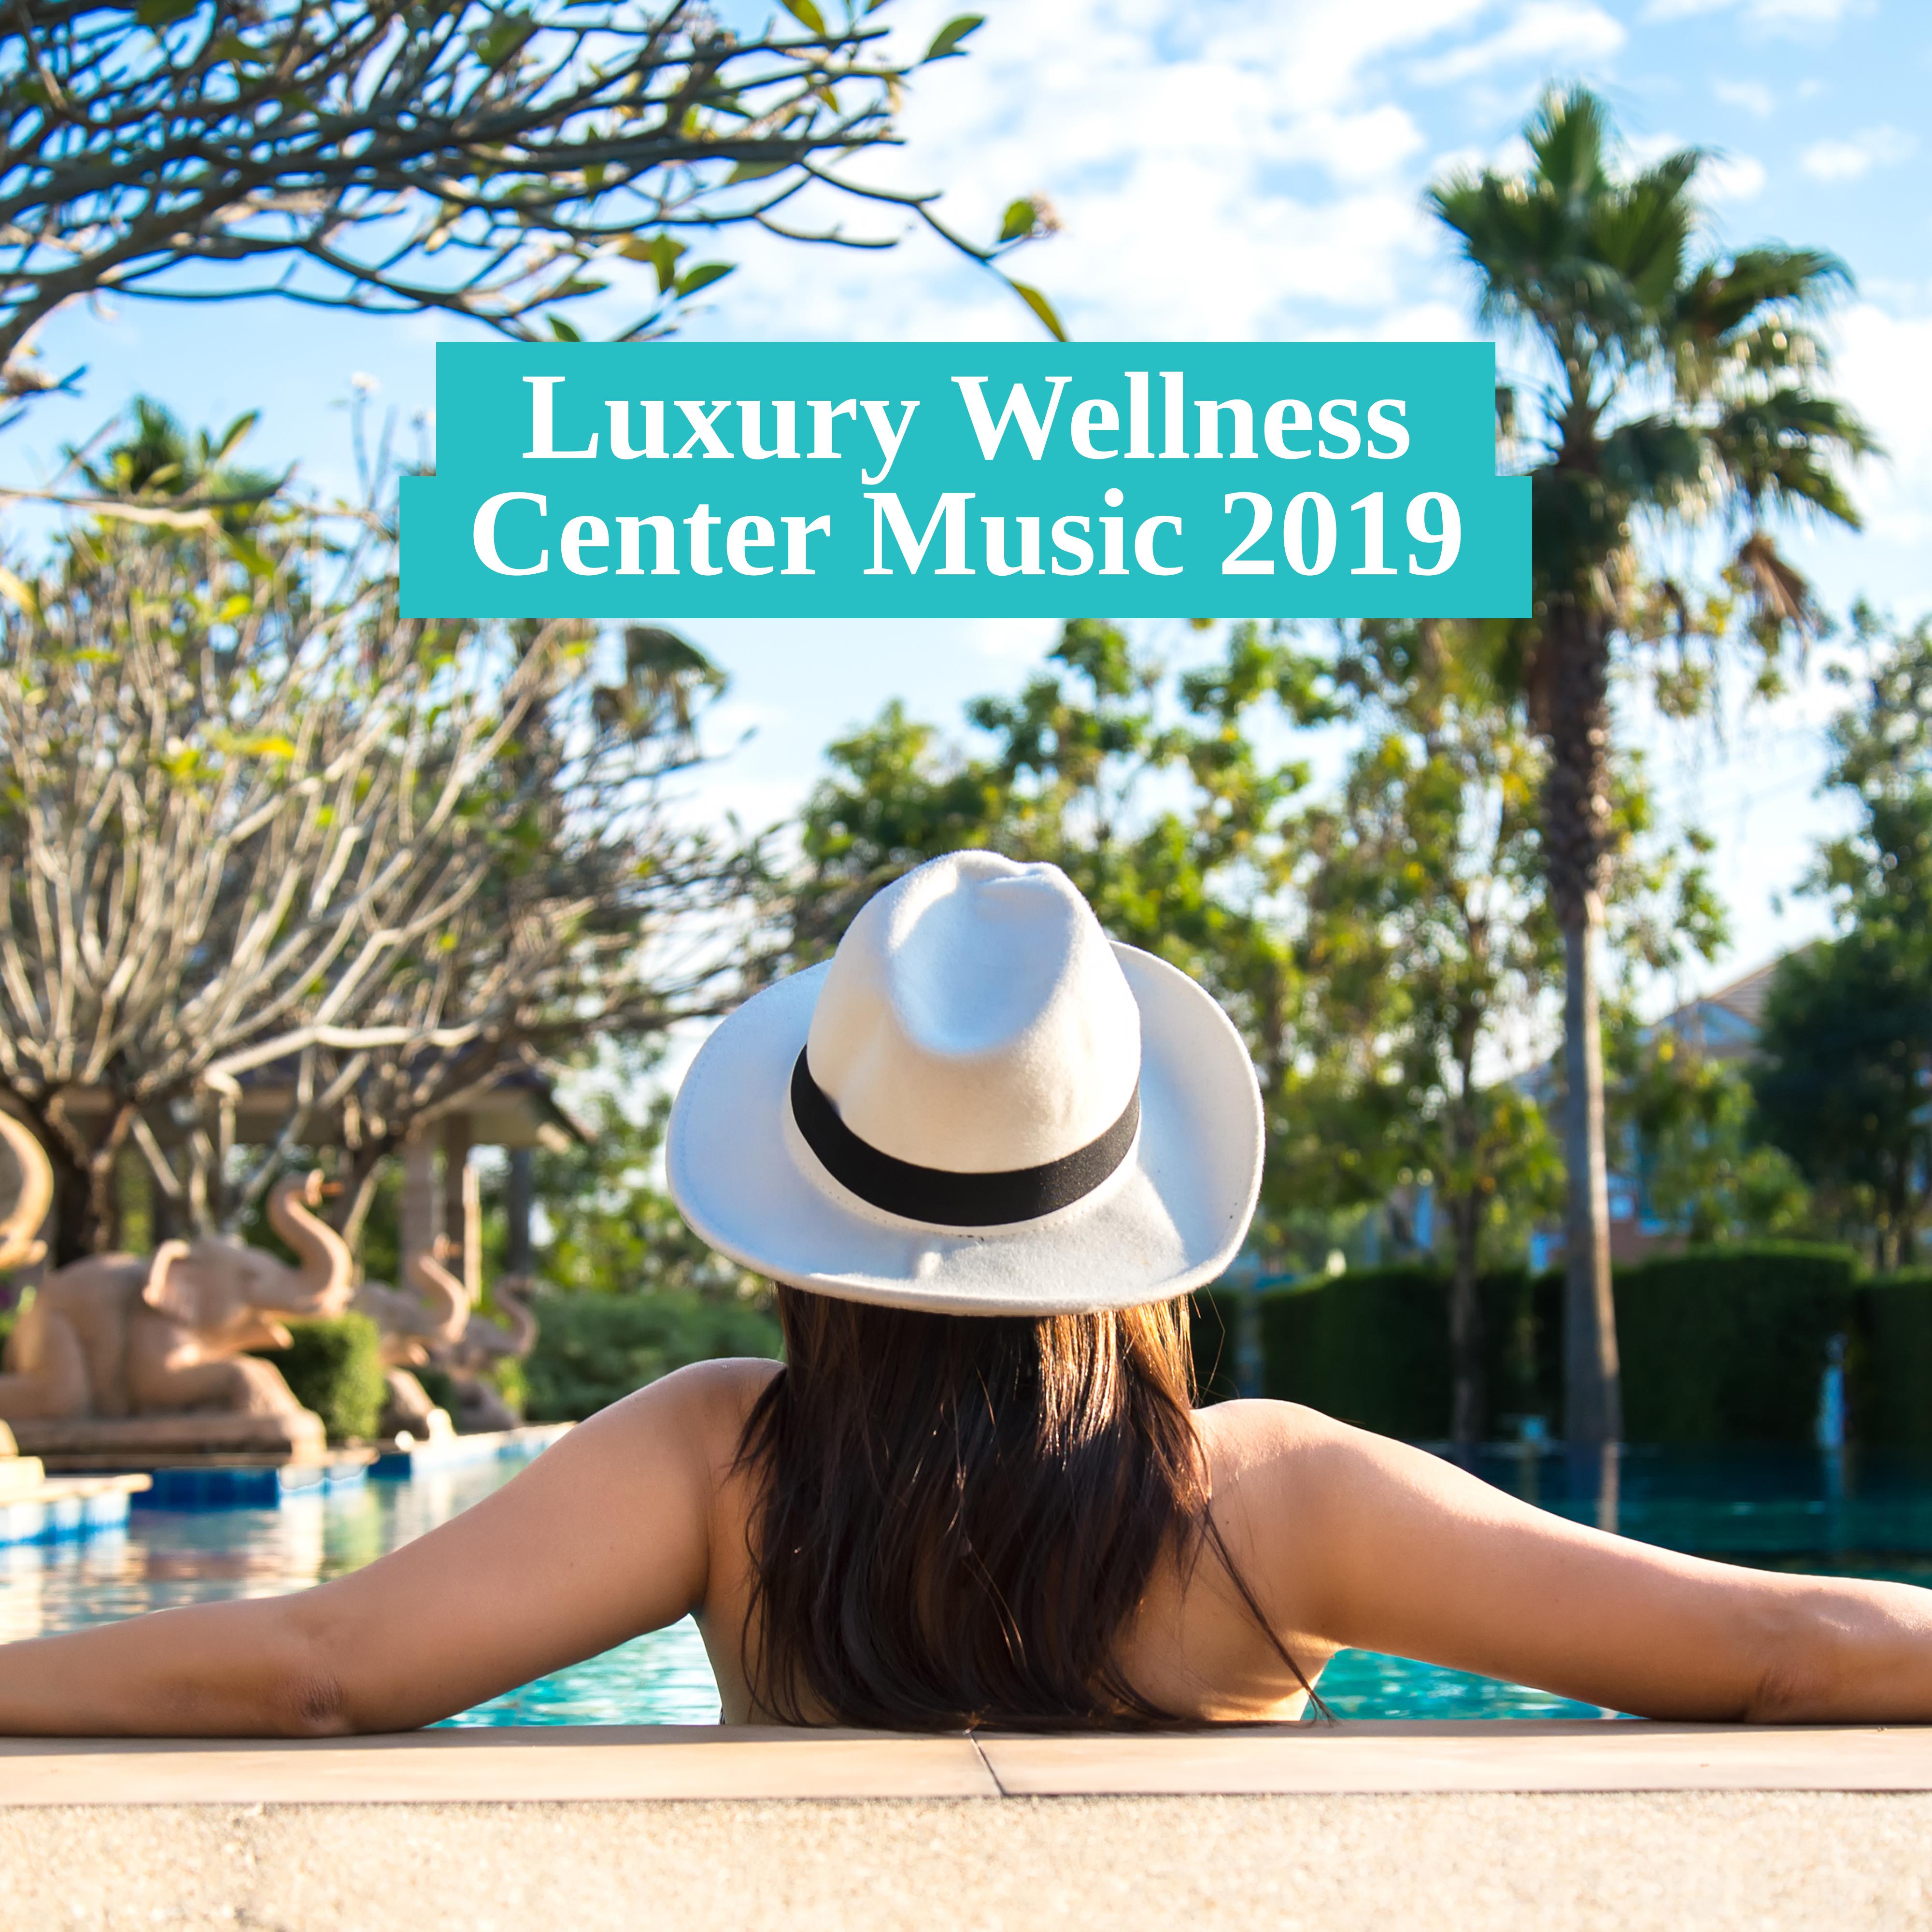 Luxury Wellness Center Music 2019: Best New Age Sounds for Spa, Massage Therapy, Sauna, Hot Baths